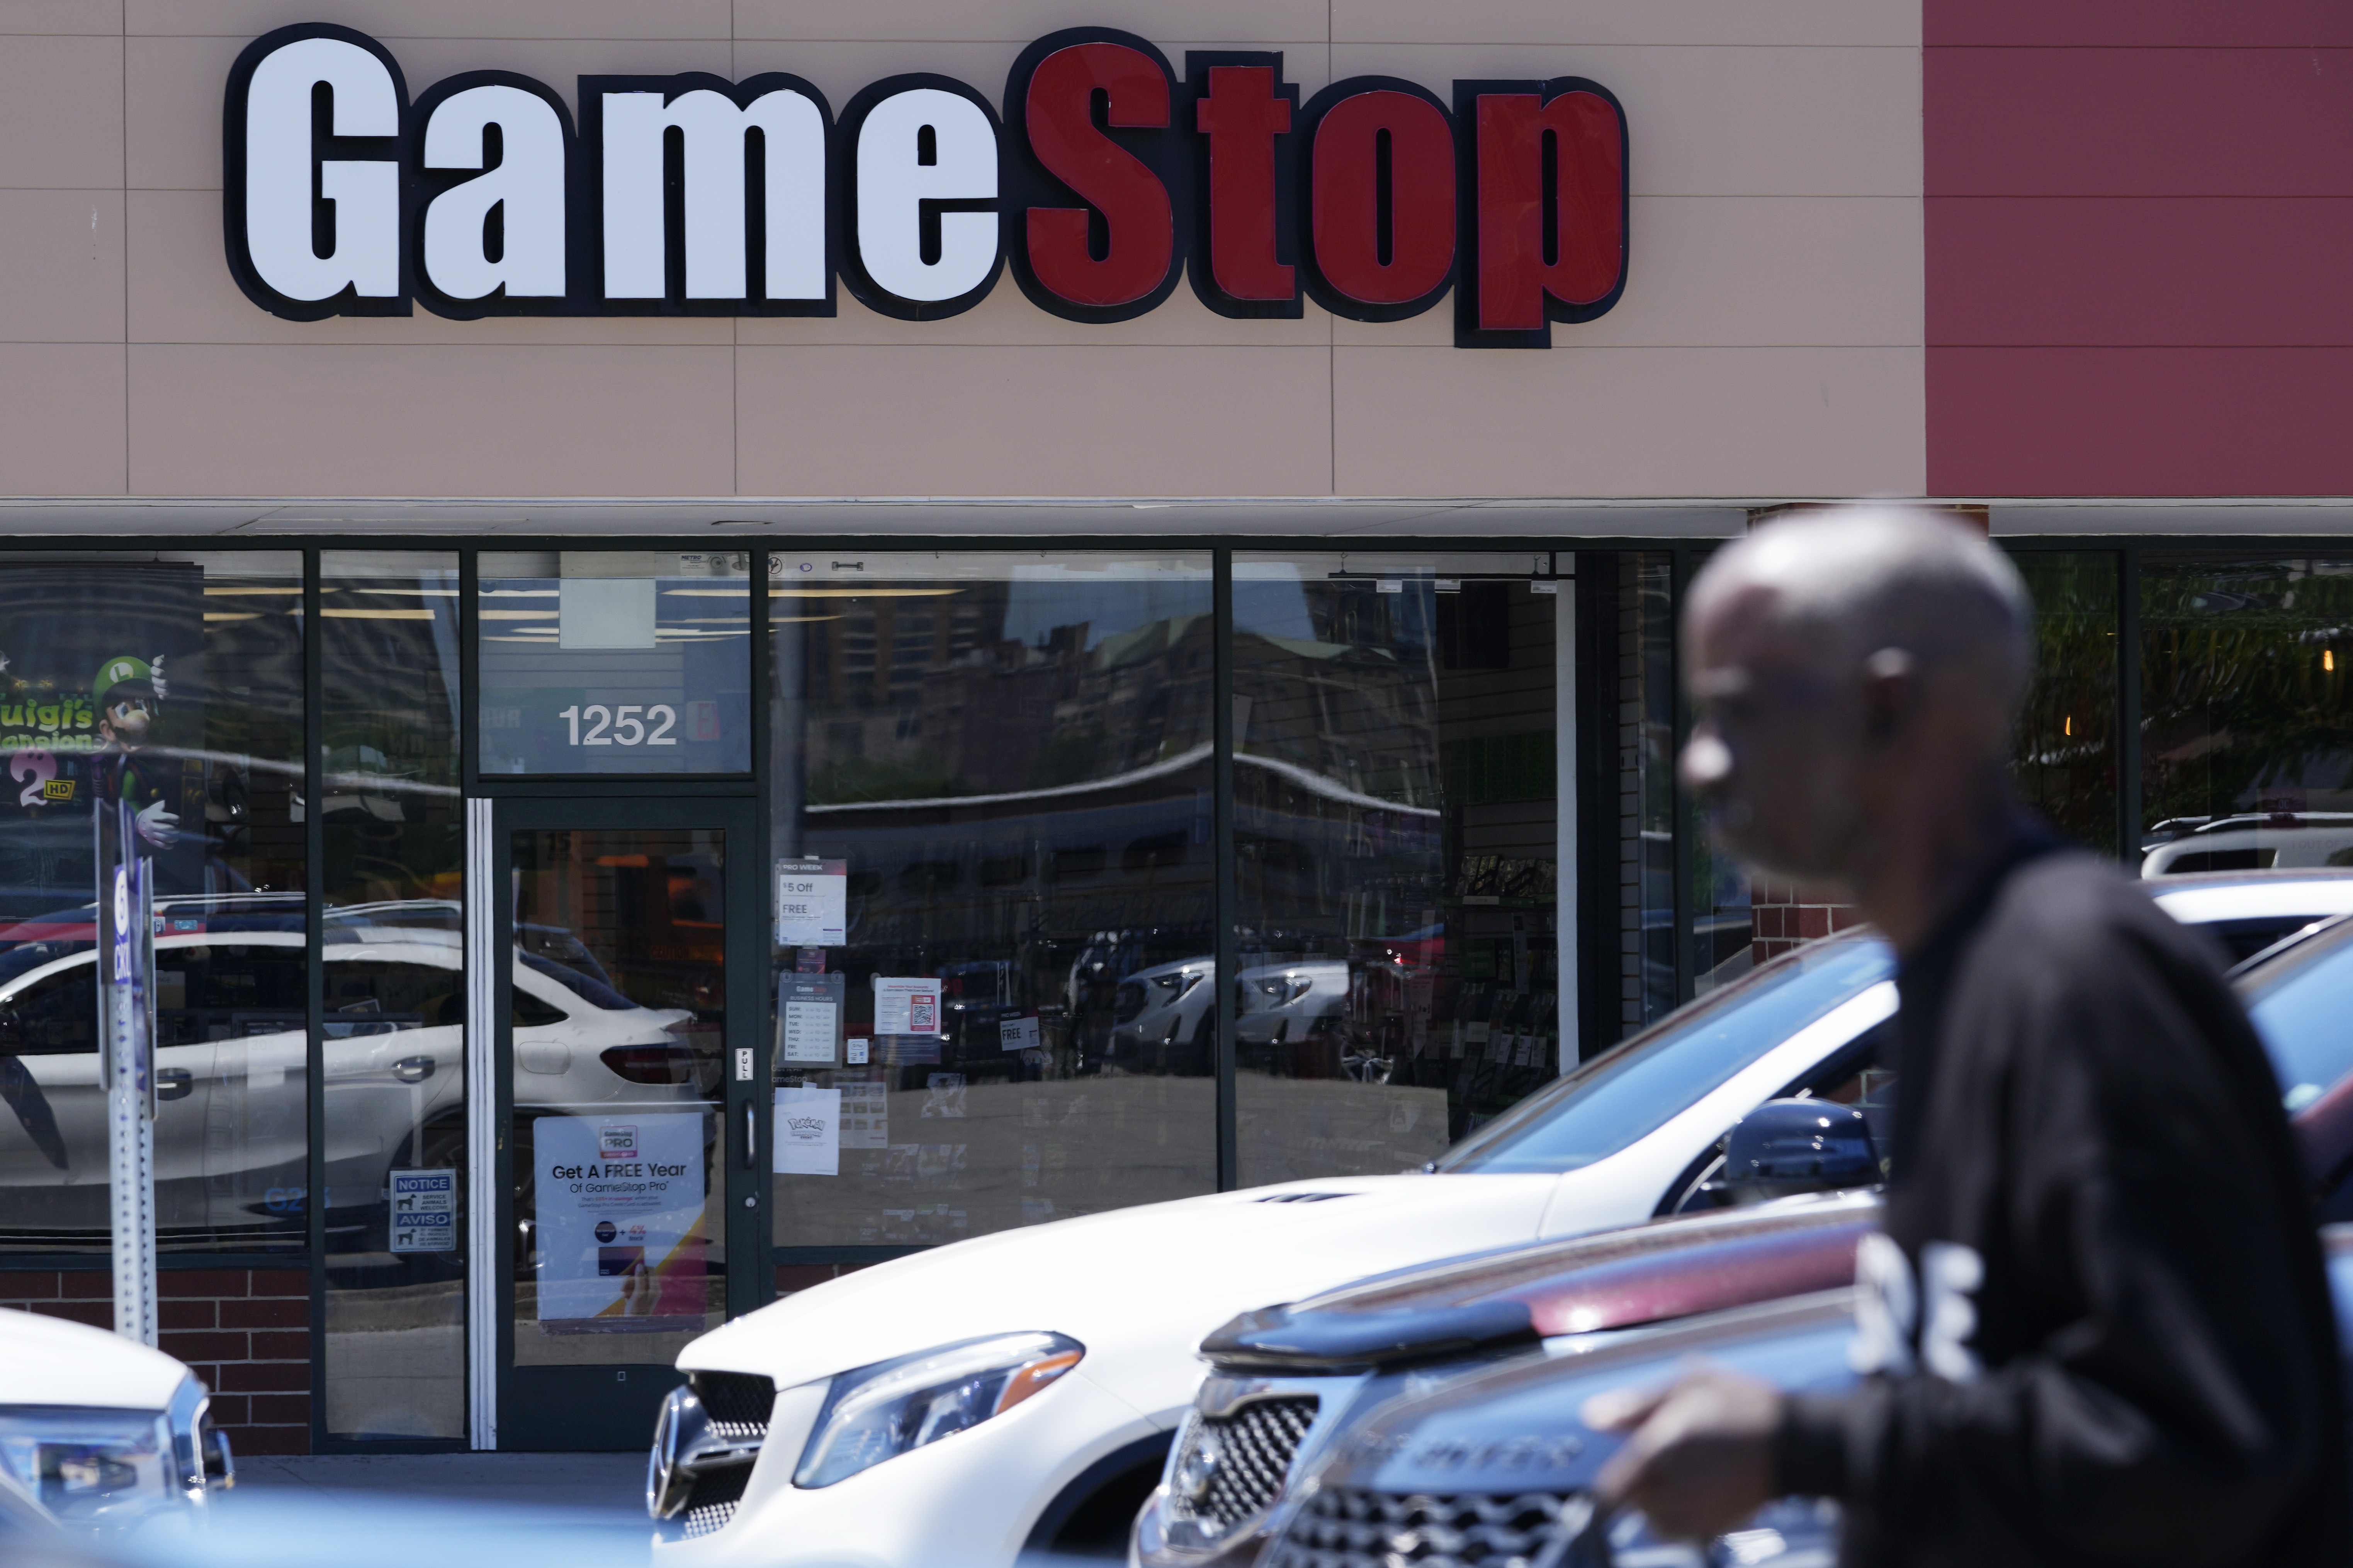 GameStop should ditch retail and become a holding company like Warren Buffett’s Berkshire Hathaway